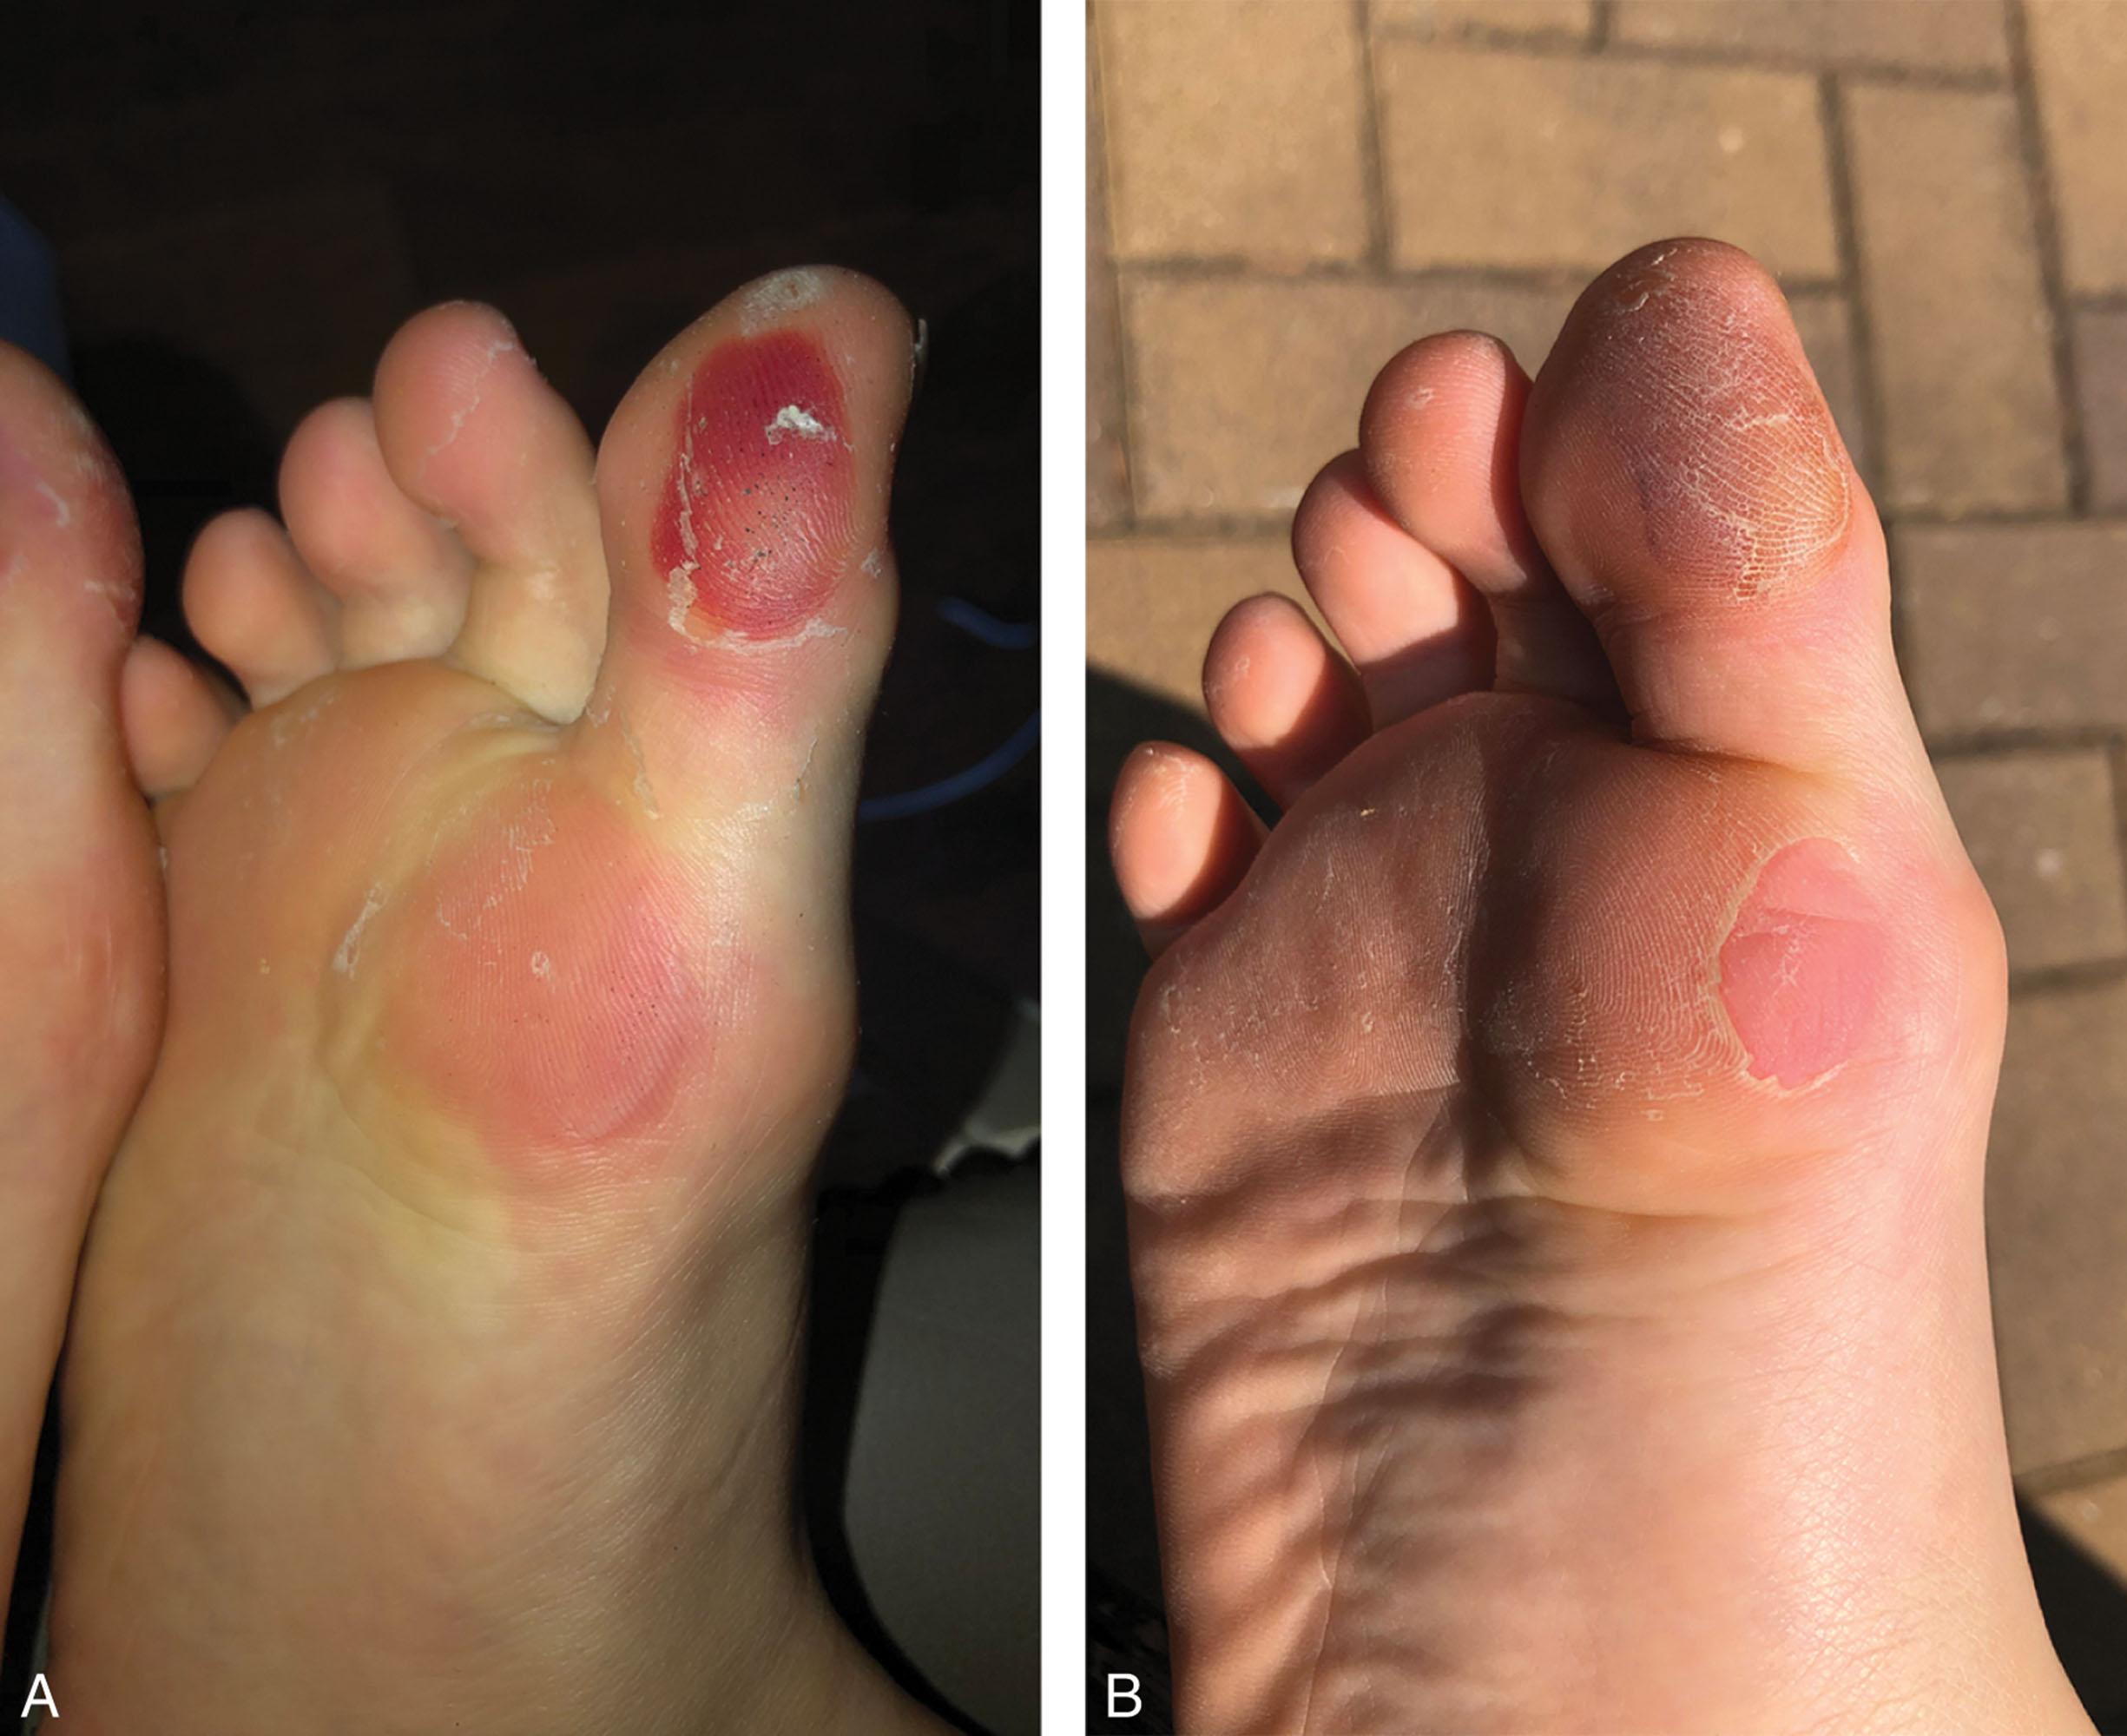 Fig. 16-1, A , Blister caused by ill-fitting shoes on the plantar medial first toe and metatarsal base. B , After a week, the area becomes hyperkeratotic in response to the trauma.